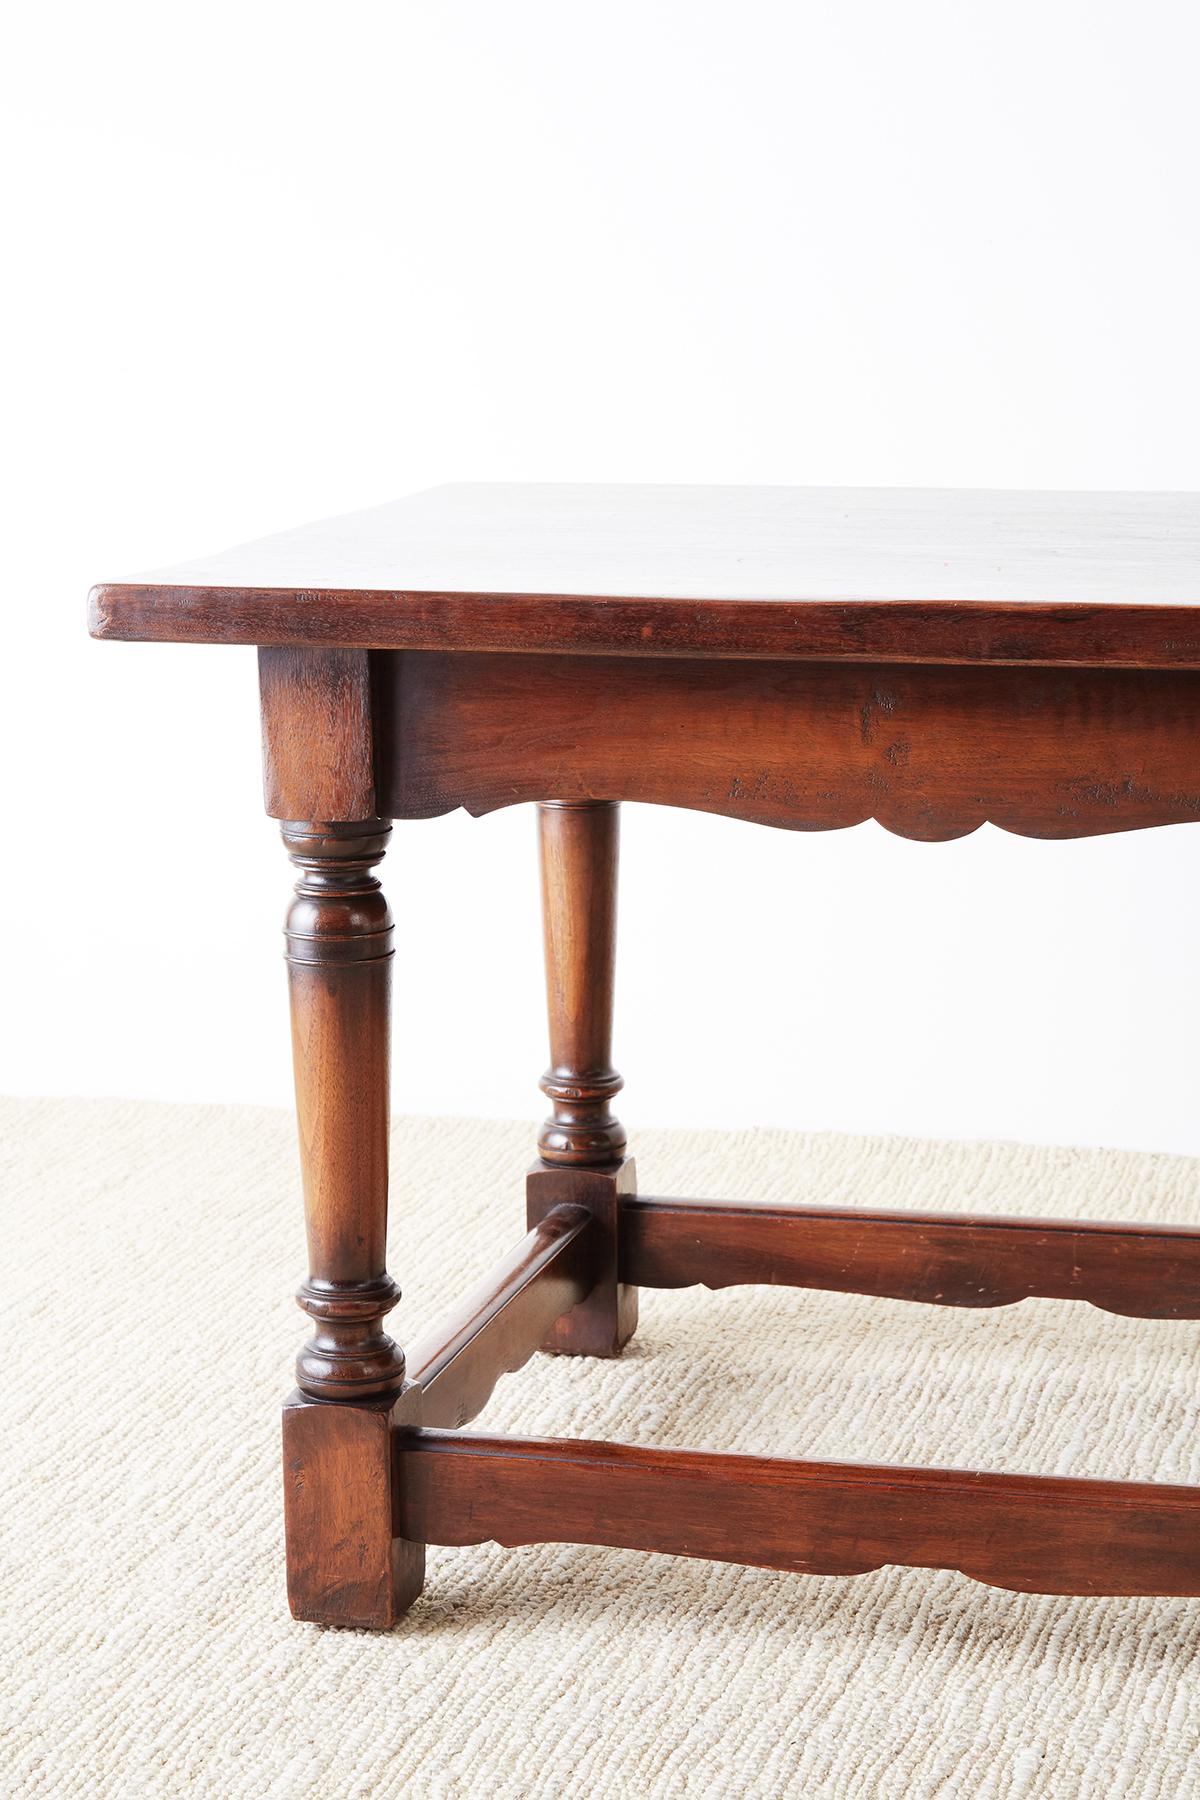 20th Century Italian Baroque Style Refectory Table or Library Table For Sale